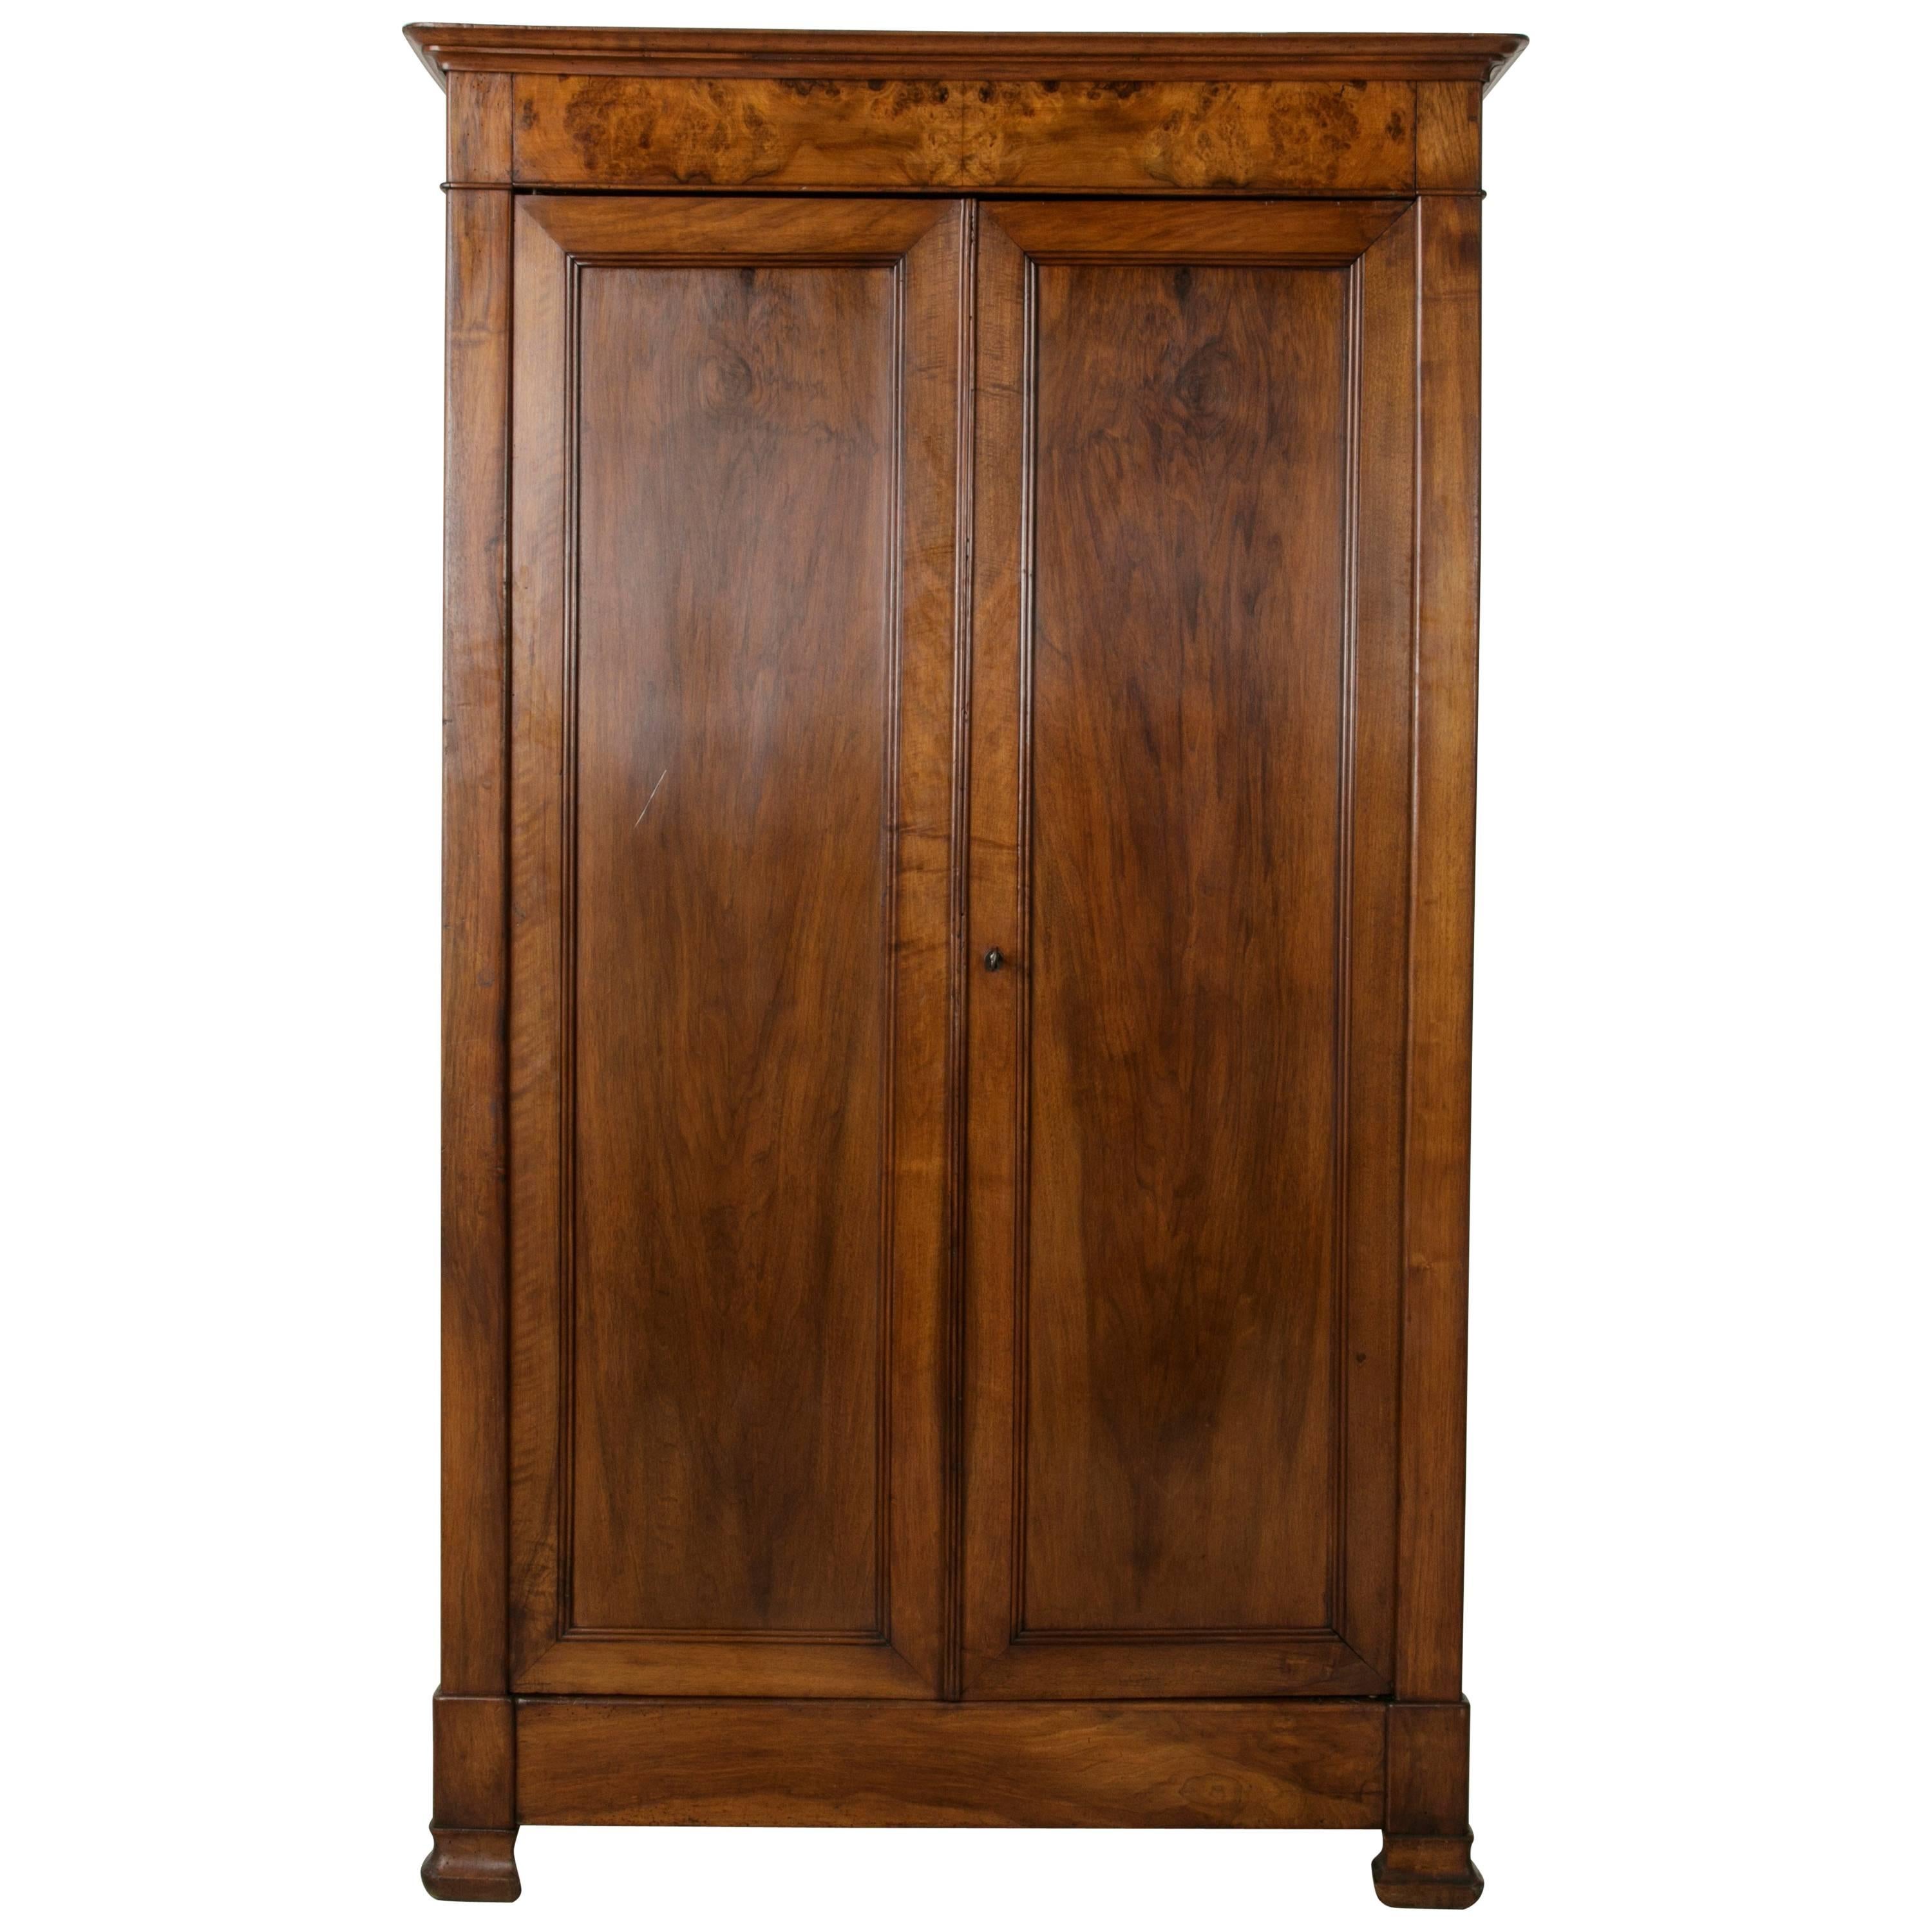 Small Scale Mid-19th Century French Louis Philippe Period Walnut Armoire